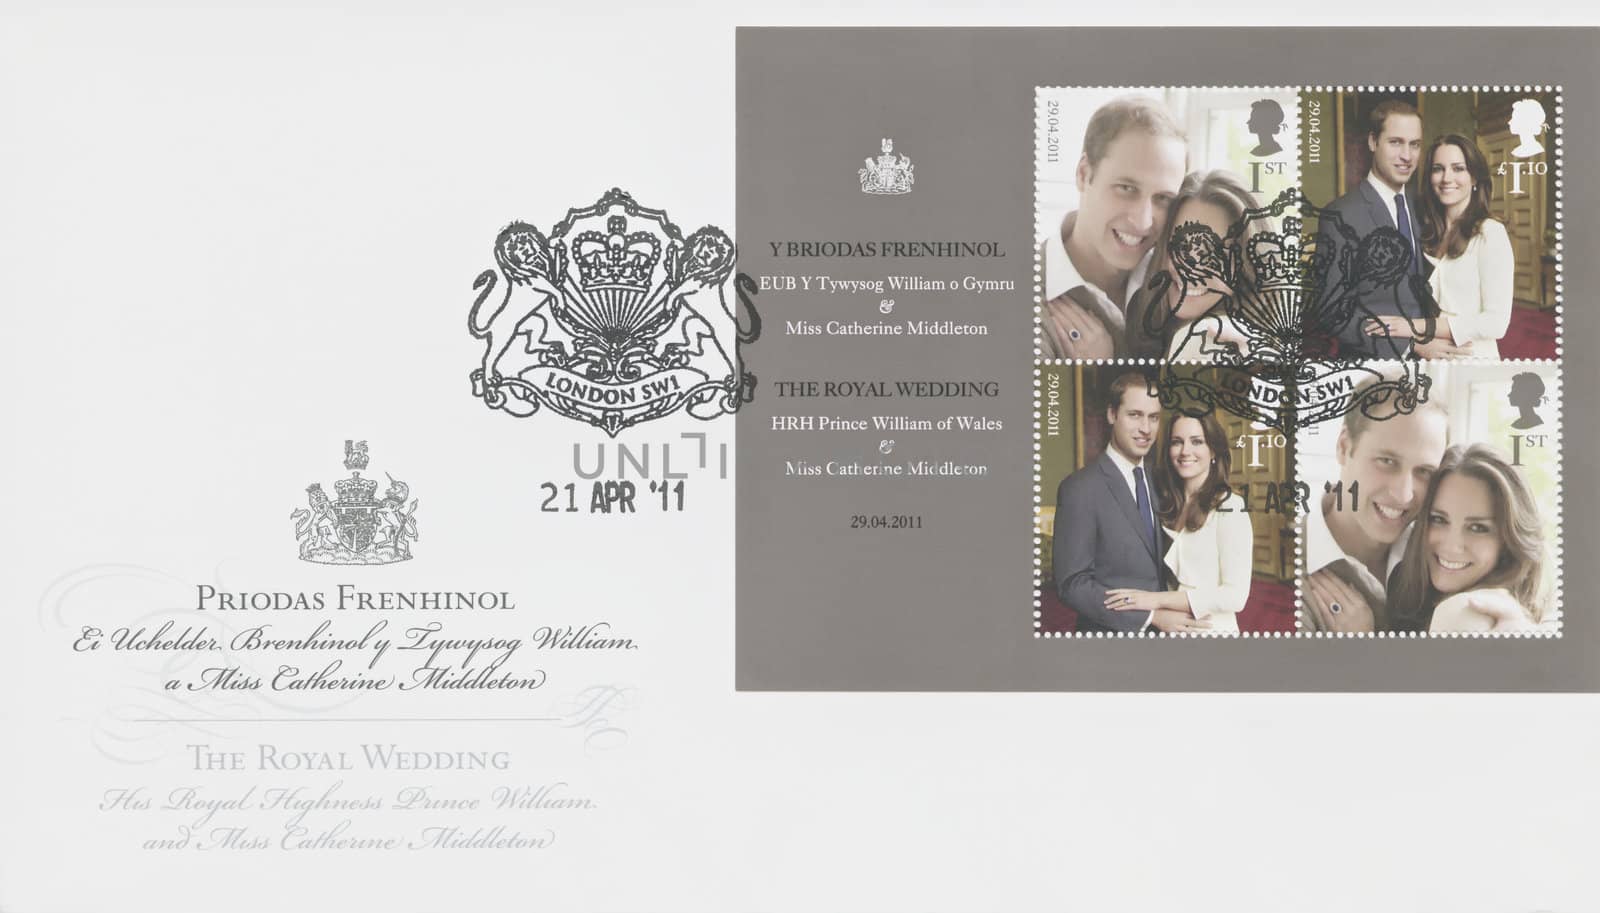 Prince William and Catherine Middleton, Royal Wedding by instinia